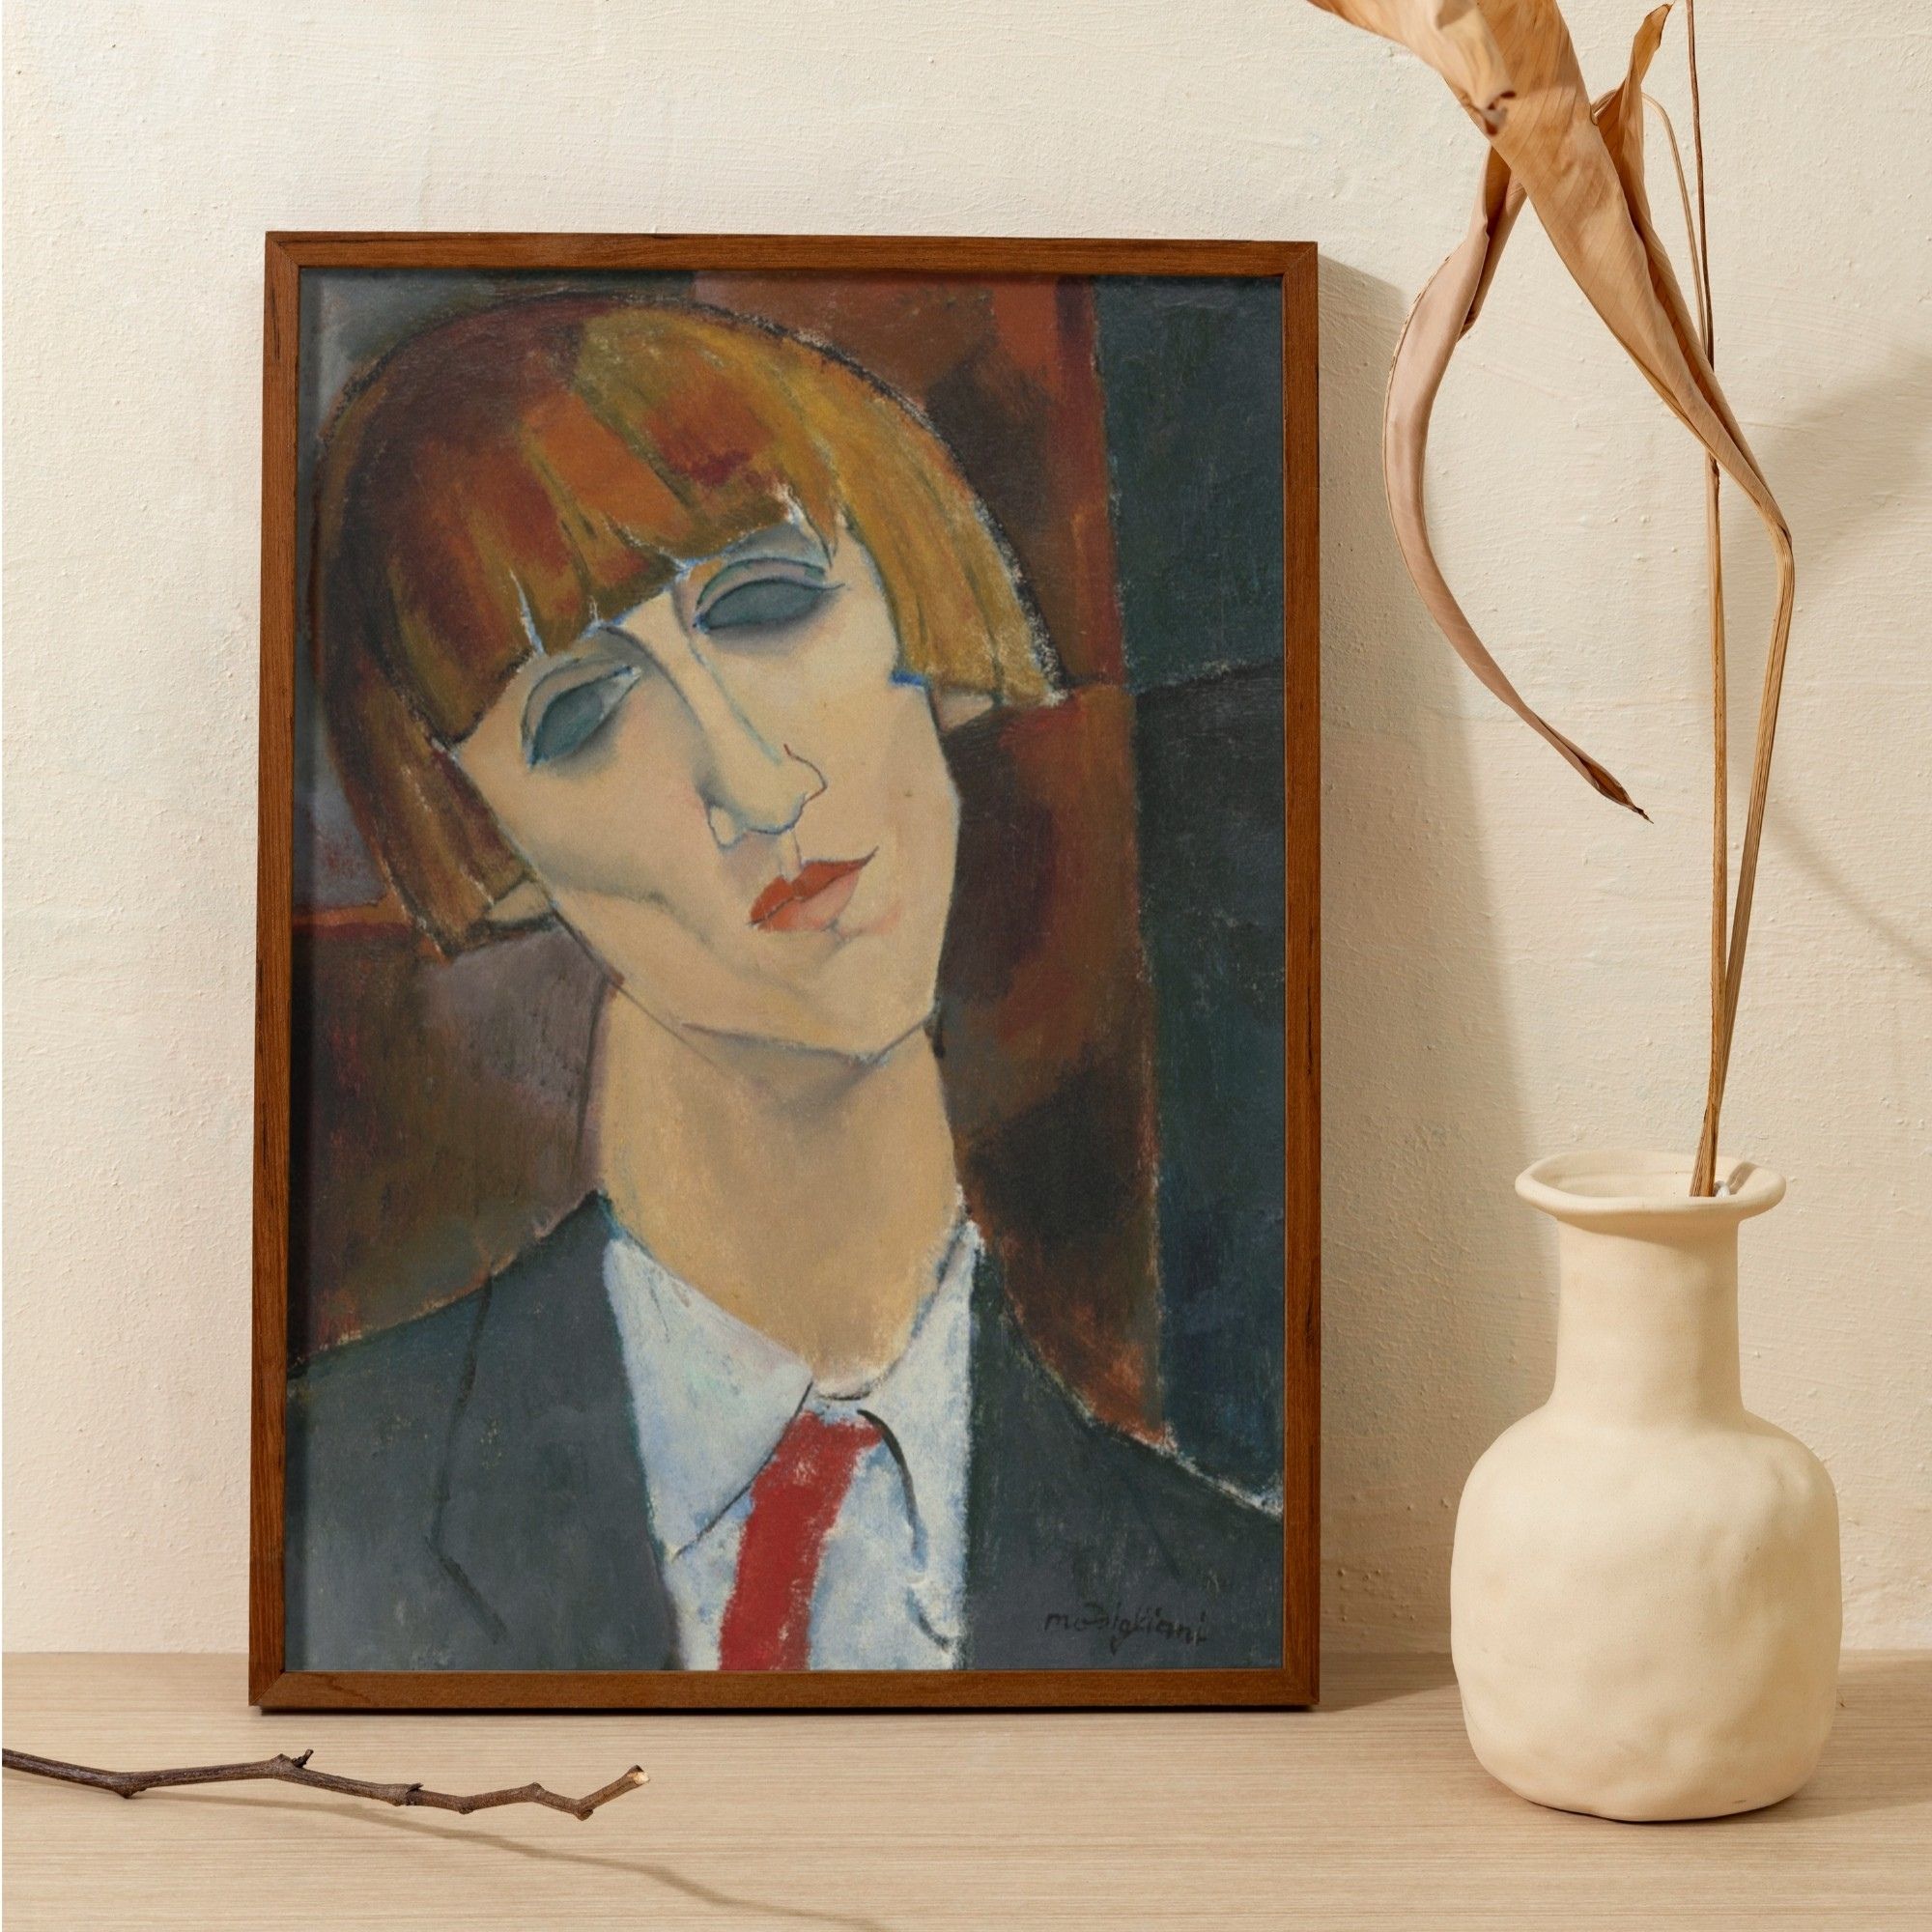 Portrait by Amedeo Modigliani of Madame Kisling, with stylized, geometrical composition and a palette of rich, earthy tones. Her closed eyes and serene expression are highlighted by the bold red of her tie and the angular backdrop, showcasing Modigliani's unique blend of expressionism and modernism.